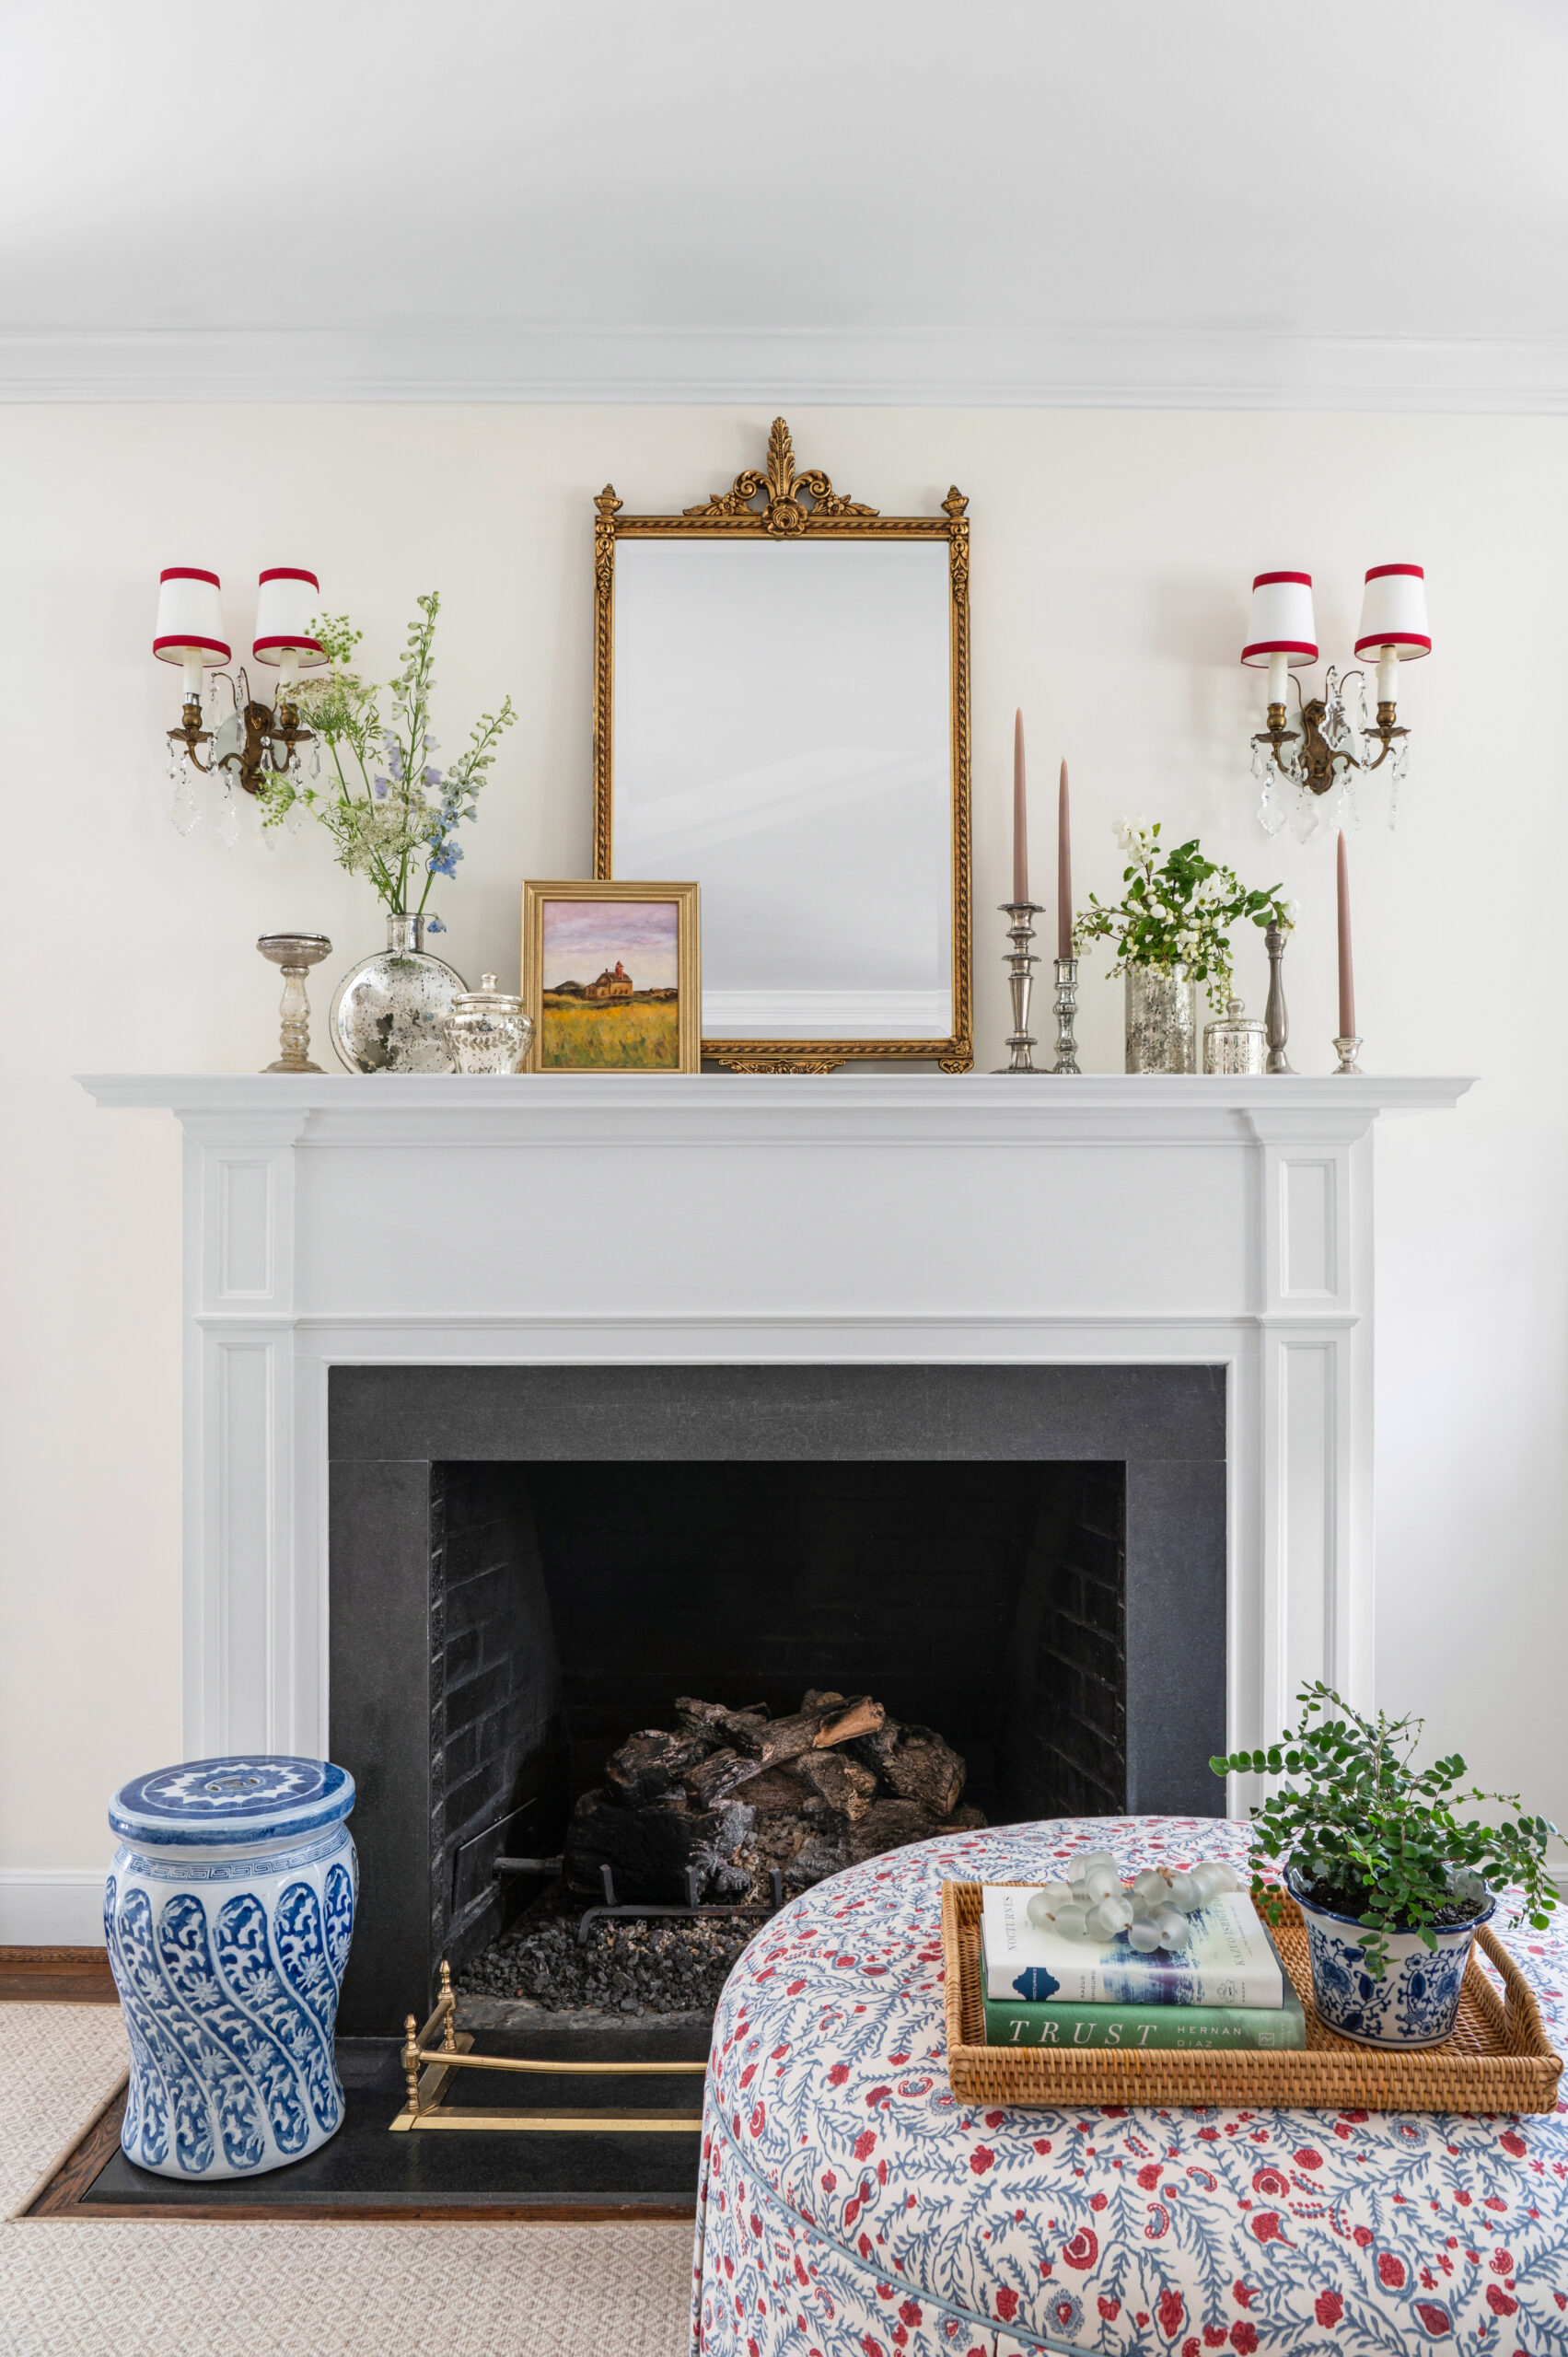 Interior design photography of a gorgeous fireplace with decor on top